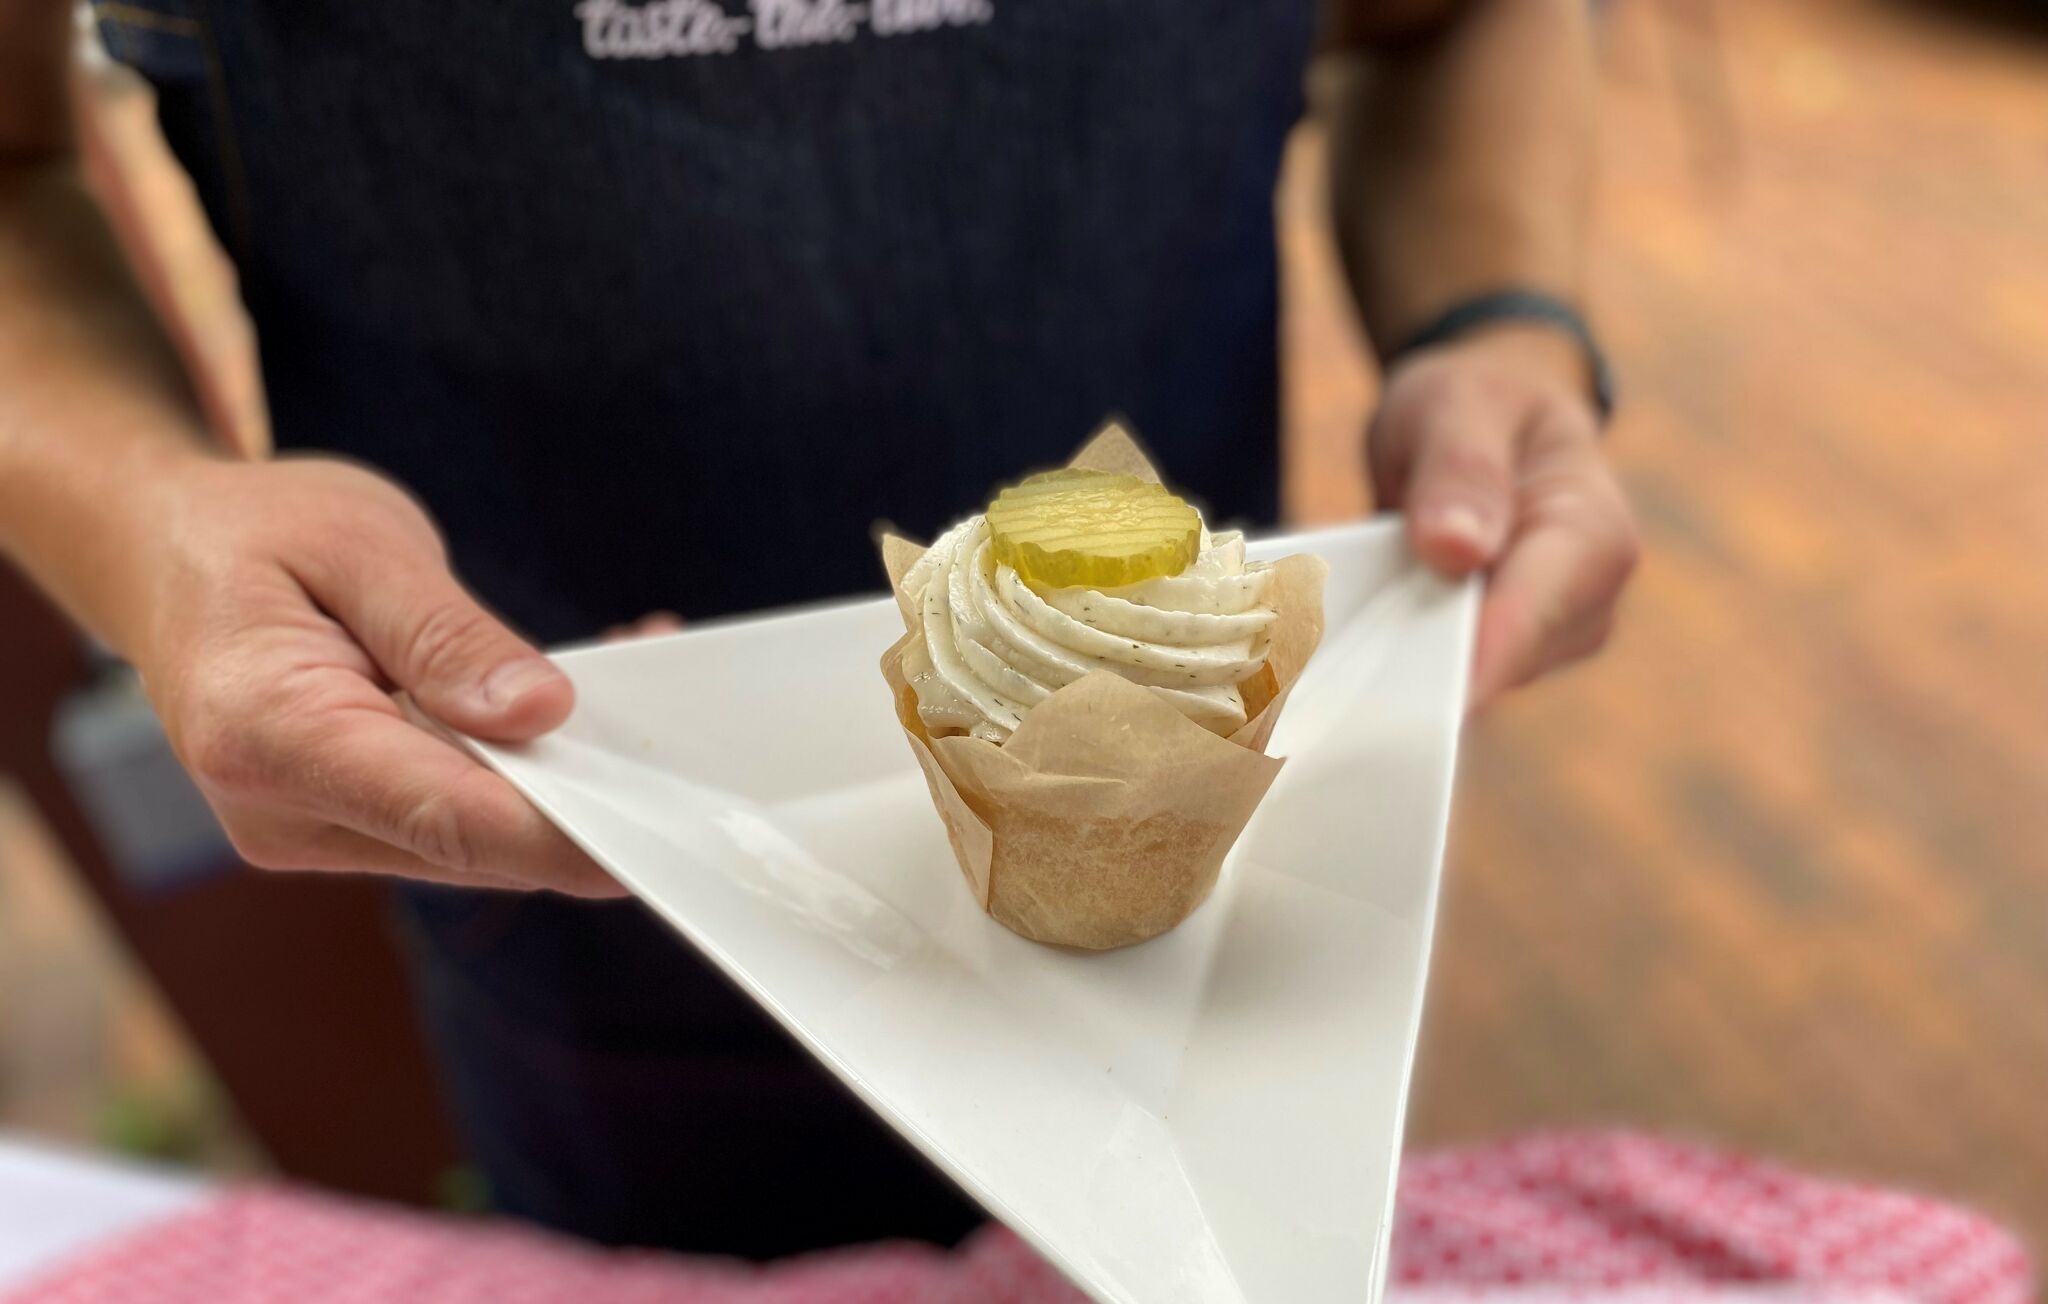 The Big E foods of 2023 include pickle cupcakes, dessert pizza